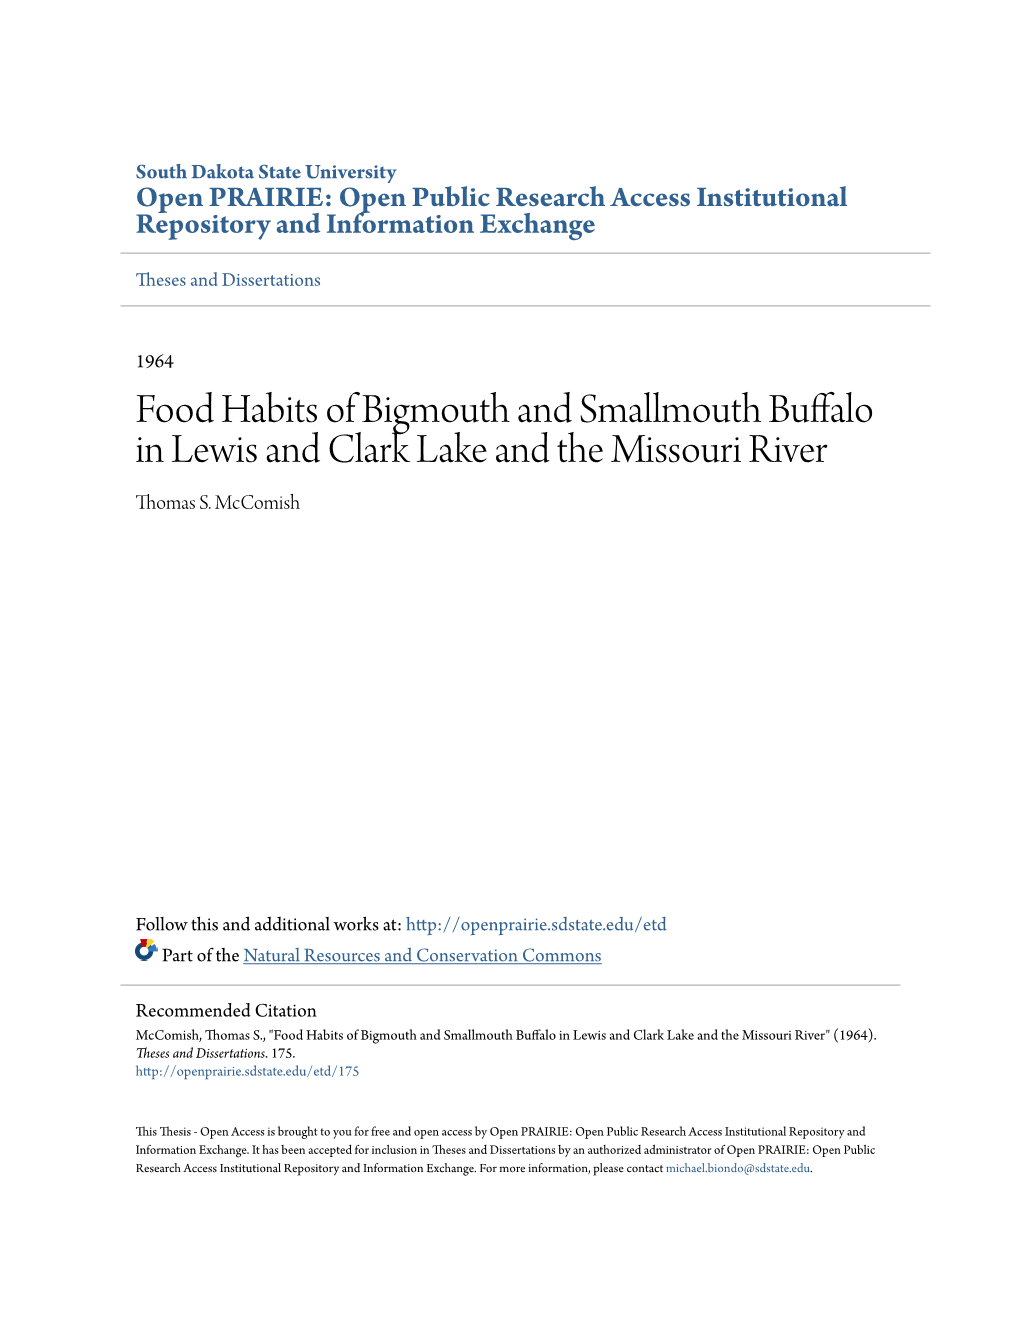 Food Habits of Bigmouth and Smallmouth Buffalo in Lewis and Clark Lake and the Missouri River Thomas S